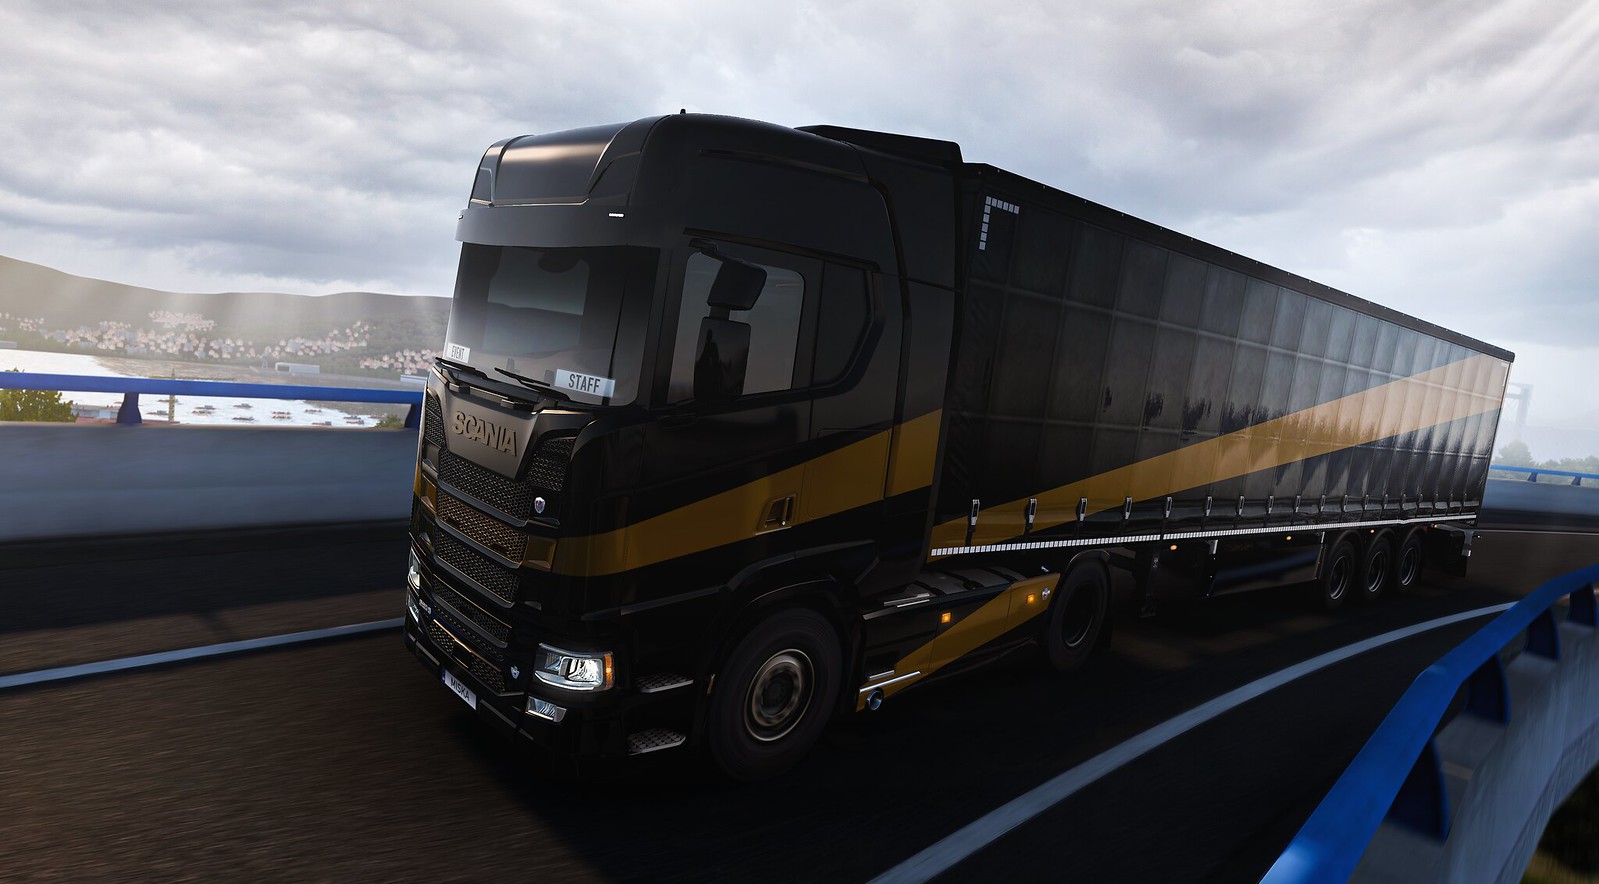 GPE event truck driving along a road in sunny weather, black and gold paint job